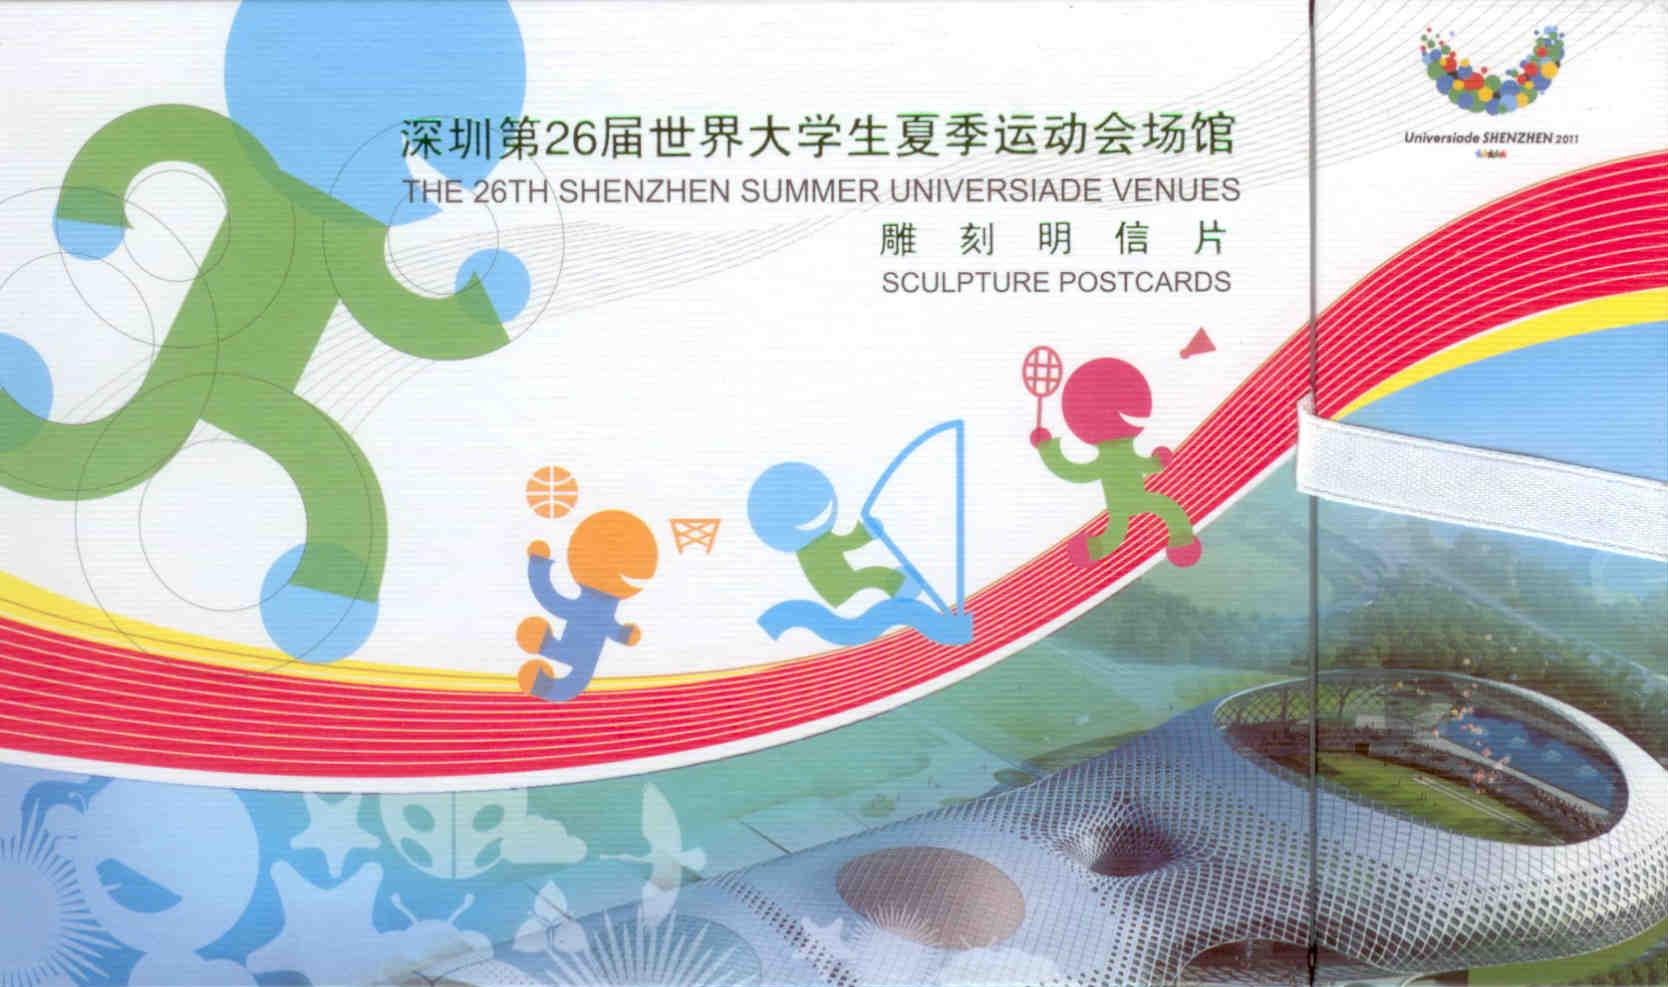 The 26th Shenzhen Summer Universiade Venues, Sculpture Postcards (PR China) (set of 10) )